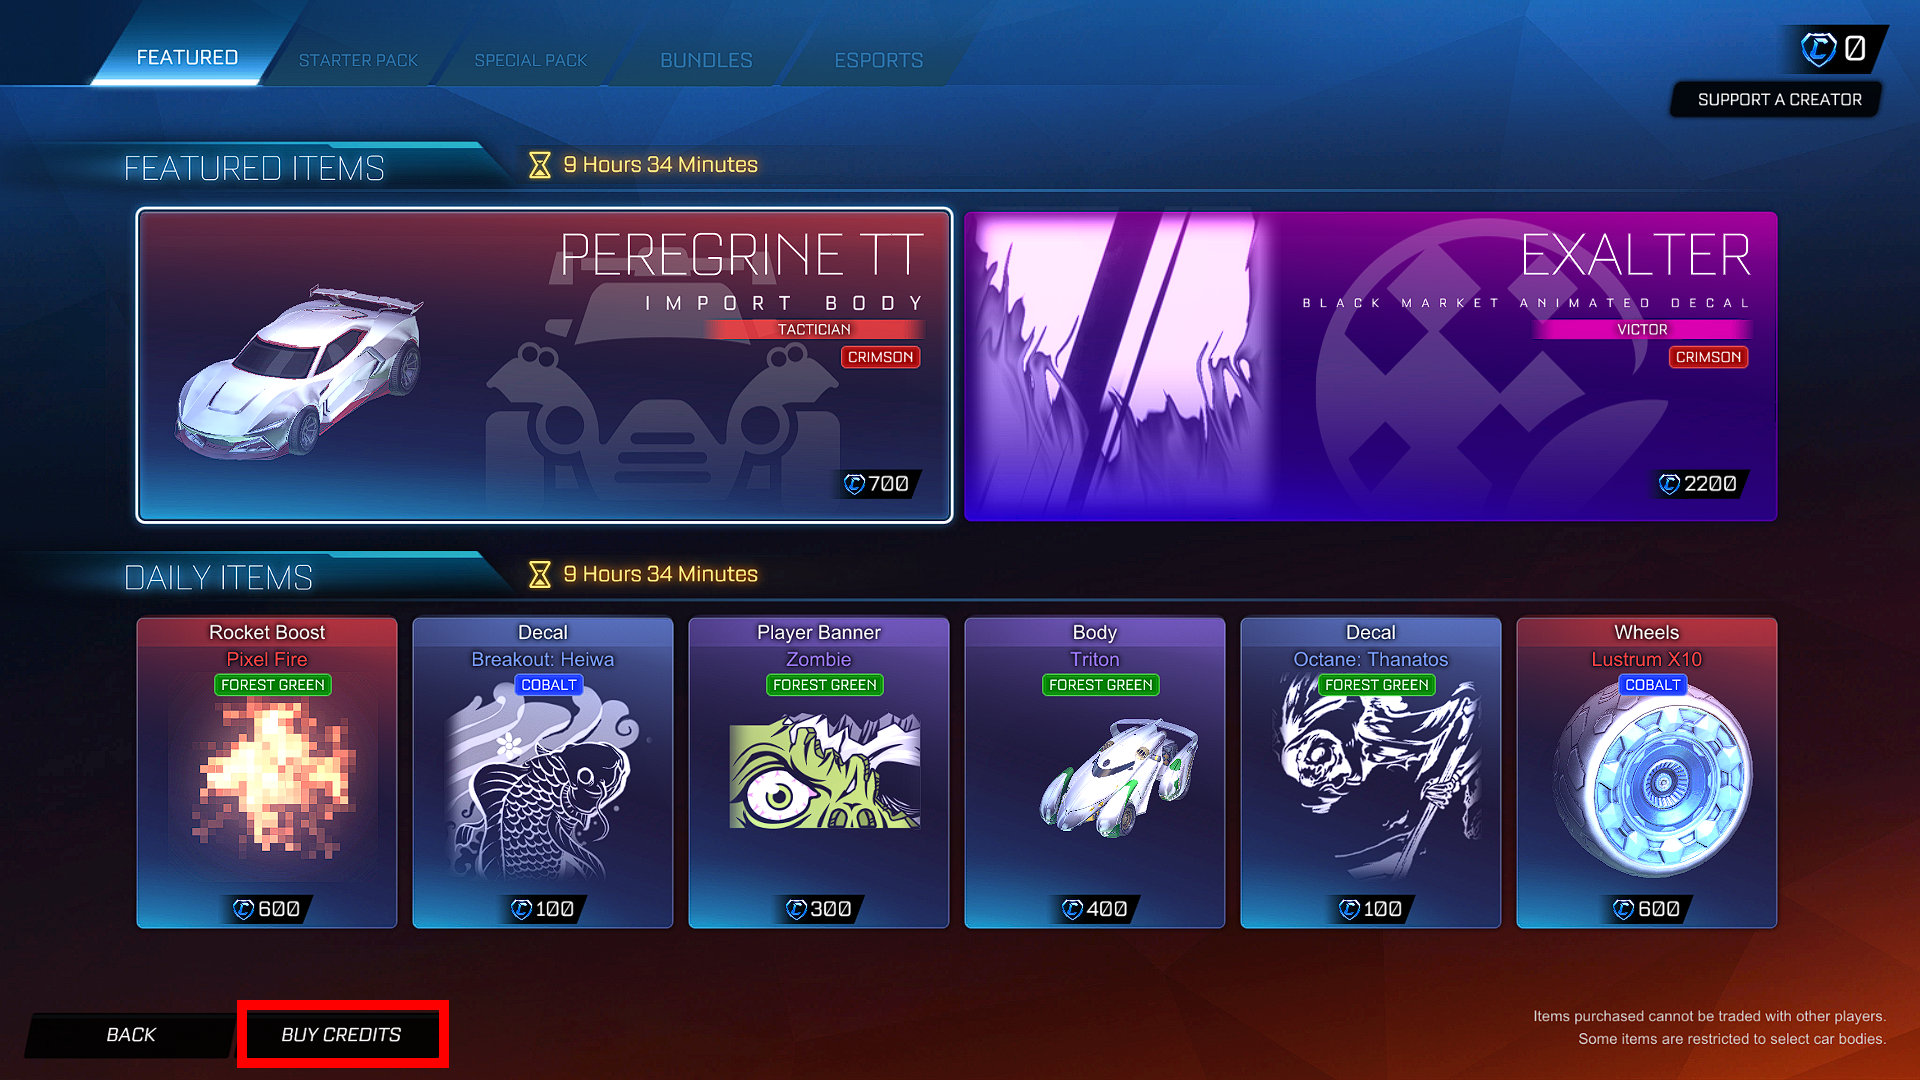 How to Get Credits in Rocket League